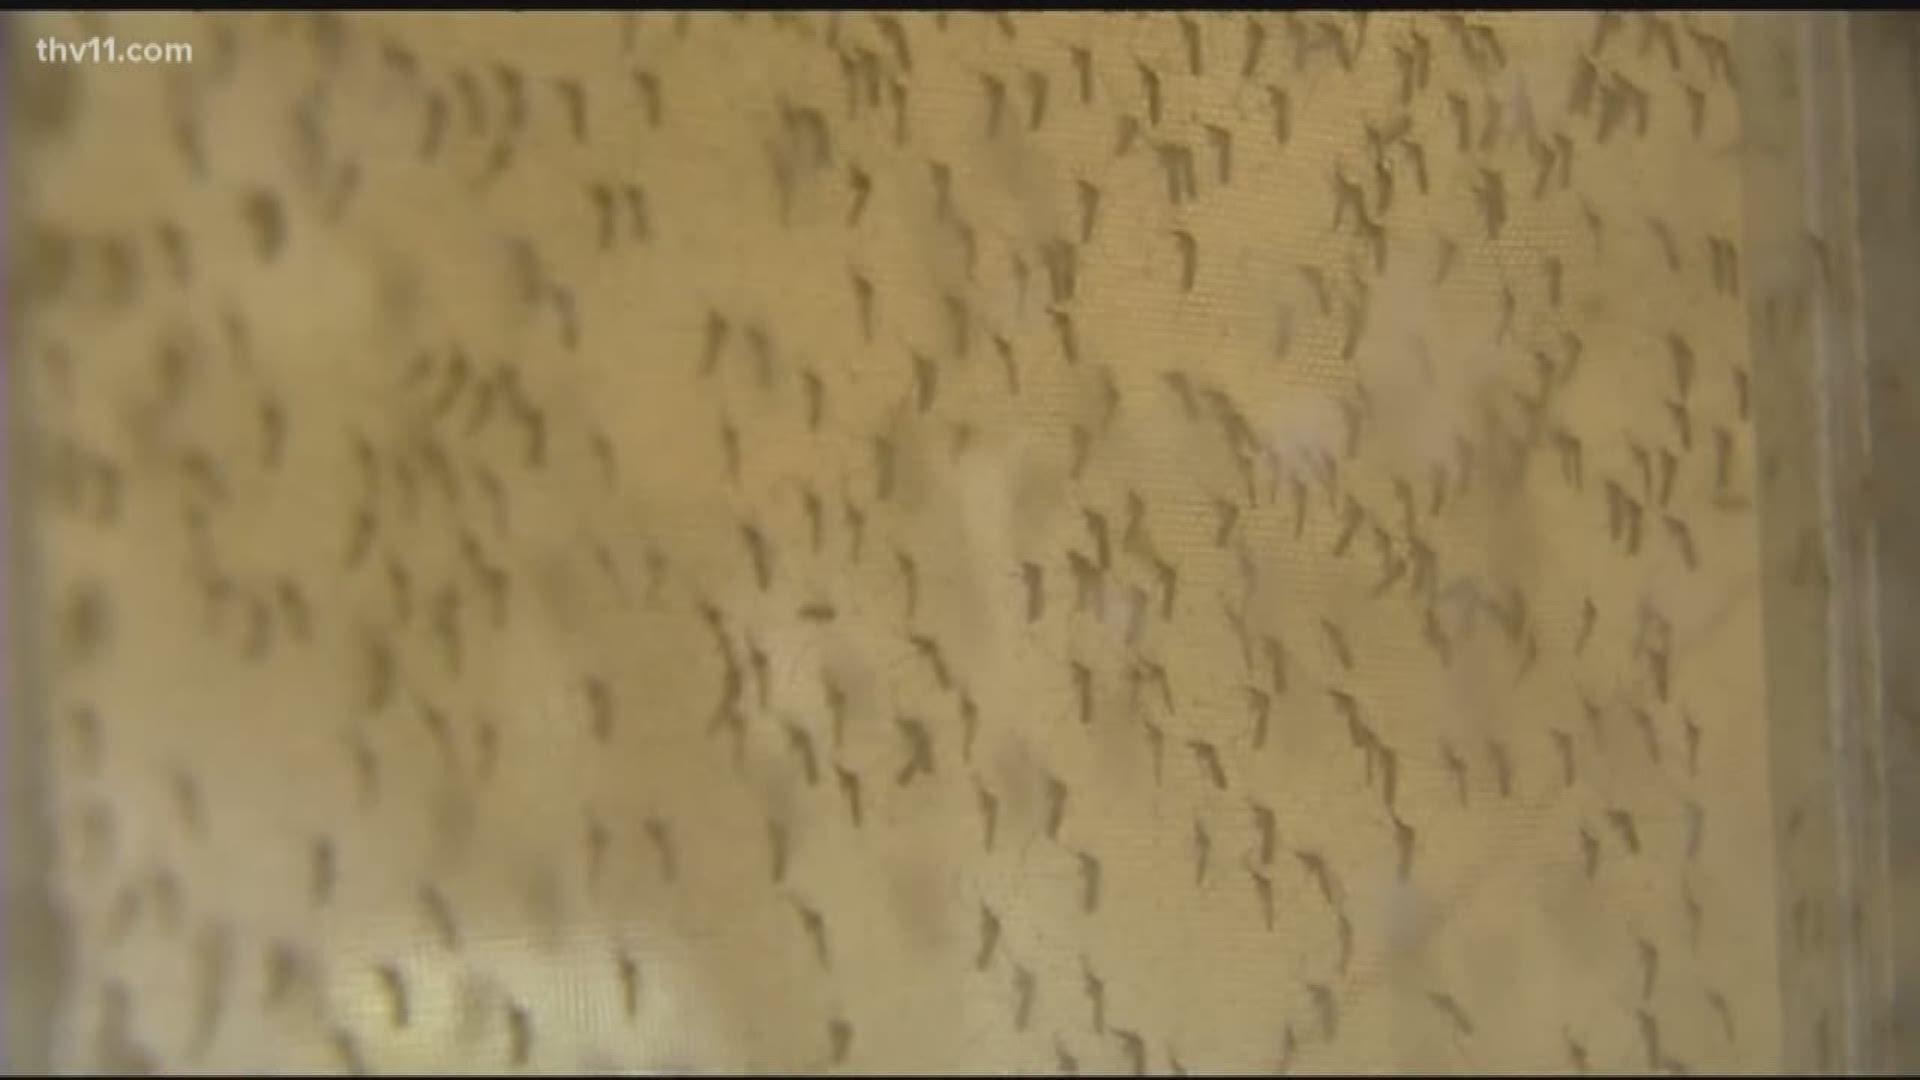 Pine Bluff Mayor Shirley Washington says the small insect has become a big problem.